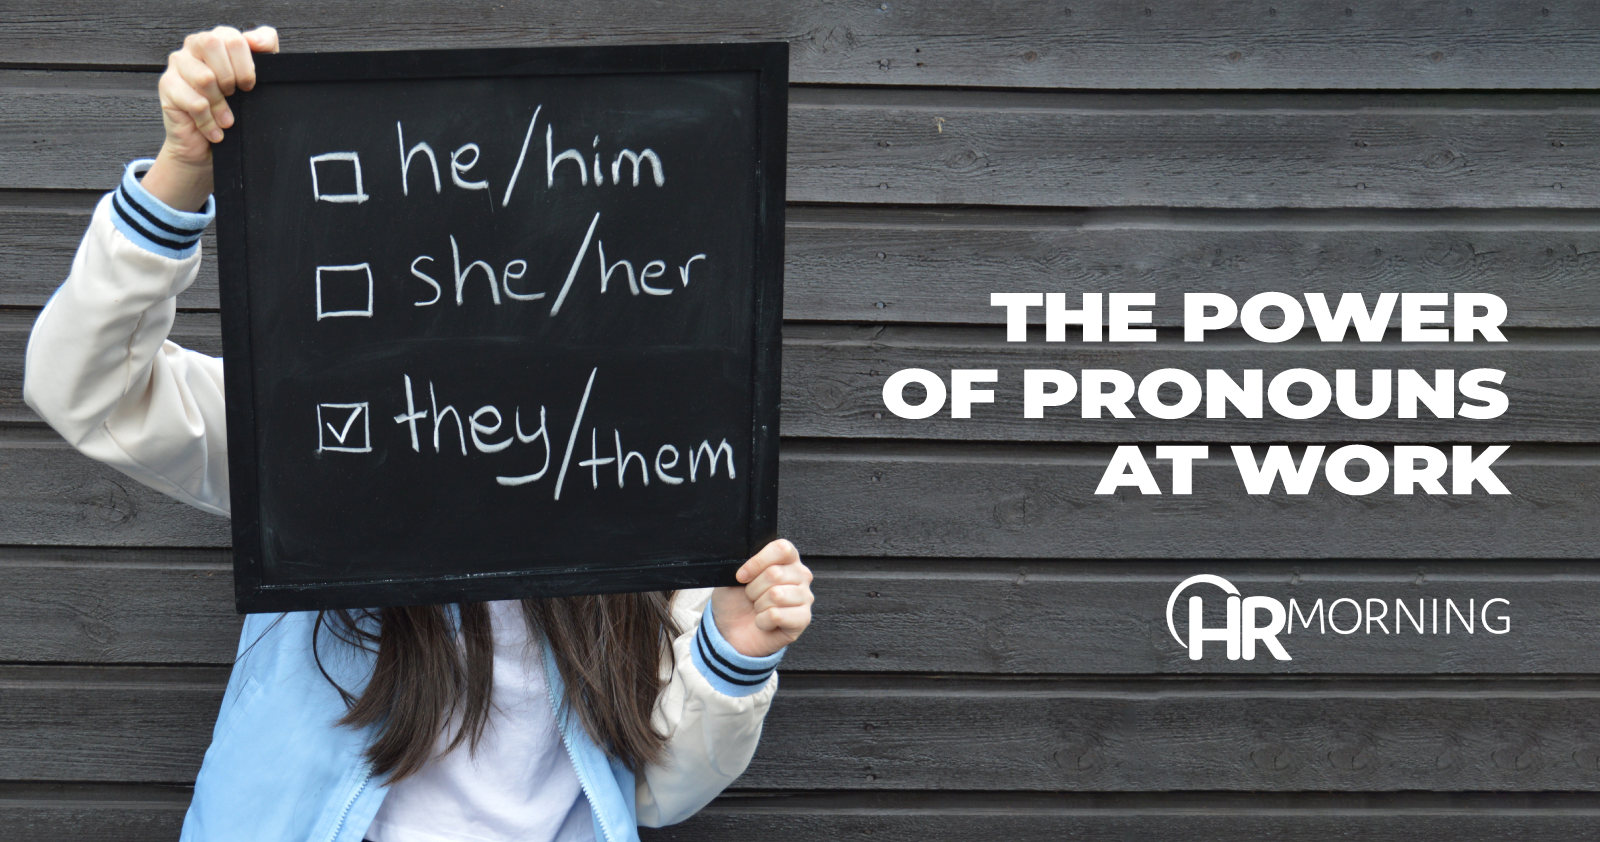 The power of pronouns at work